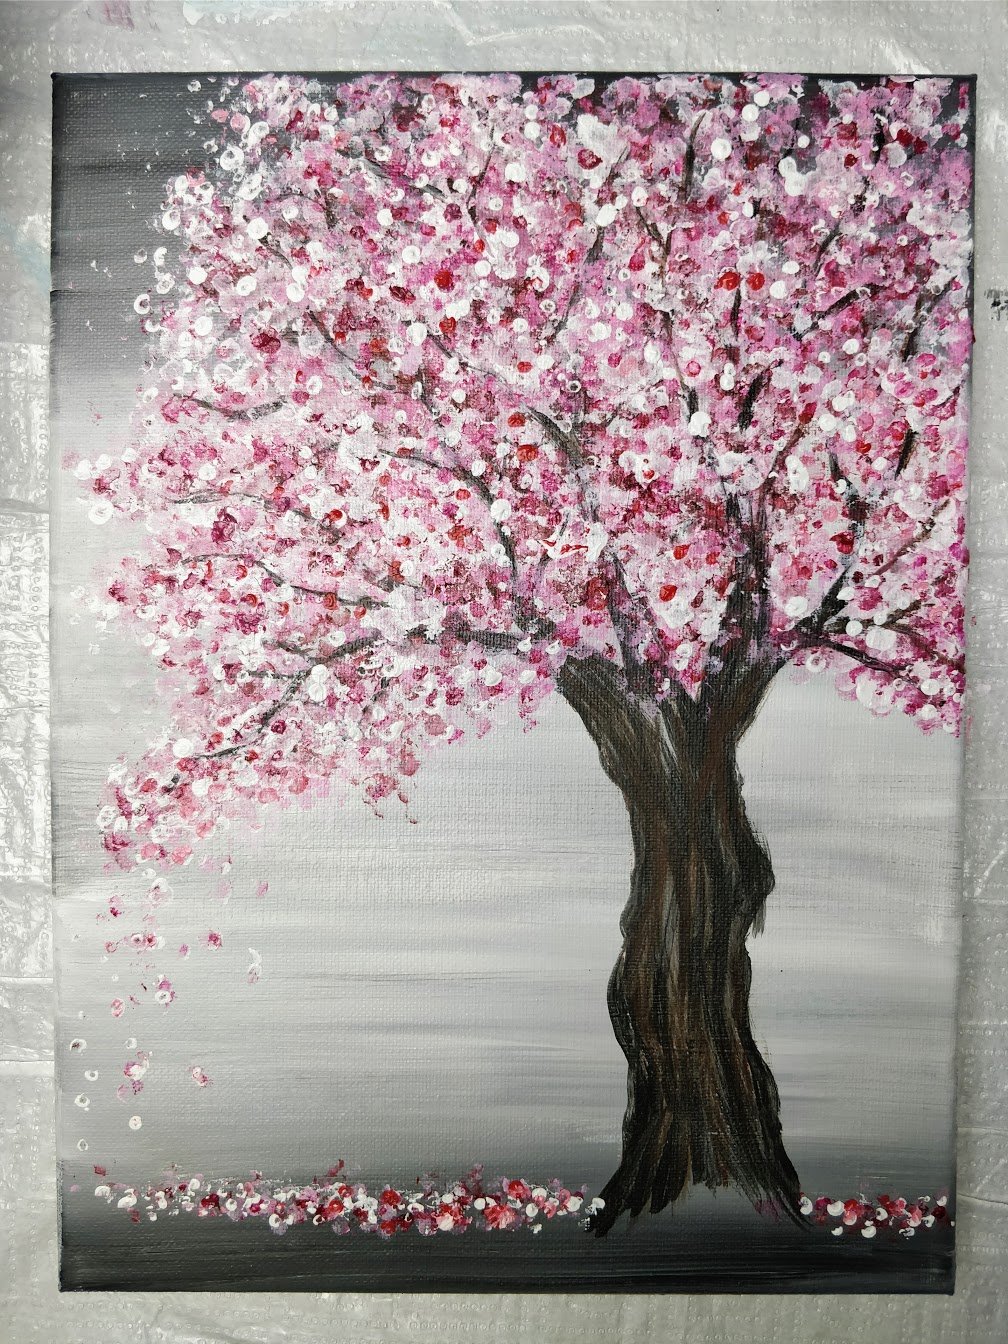 Painting A Cherry Blossom Tree With Acrylics And Cotton Swabs Add the detailing to the sakura. painting a cherry blossom tree with